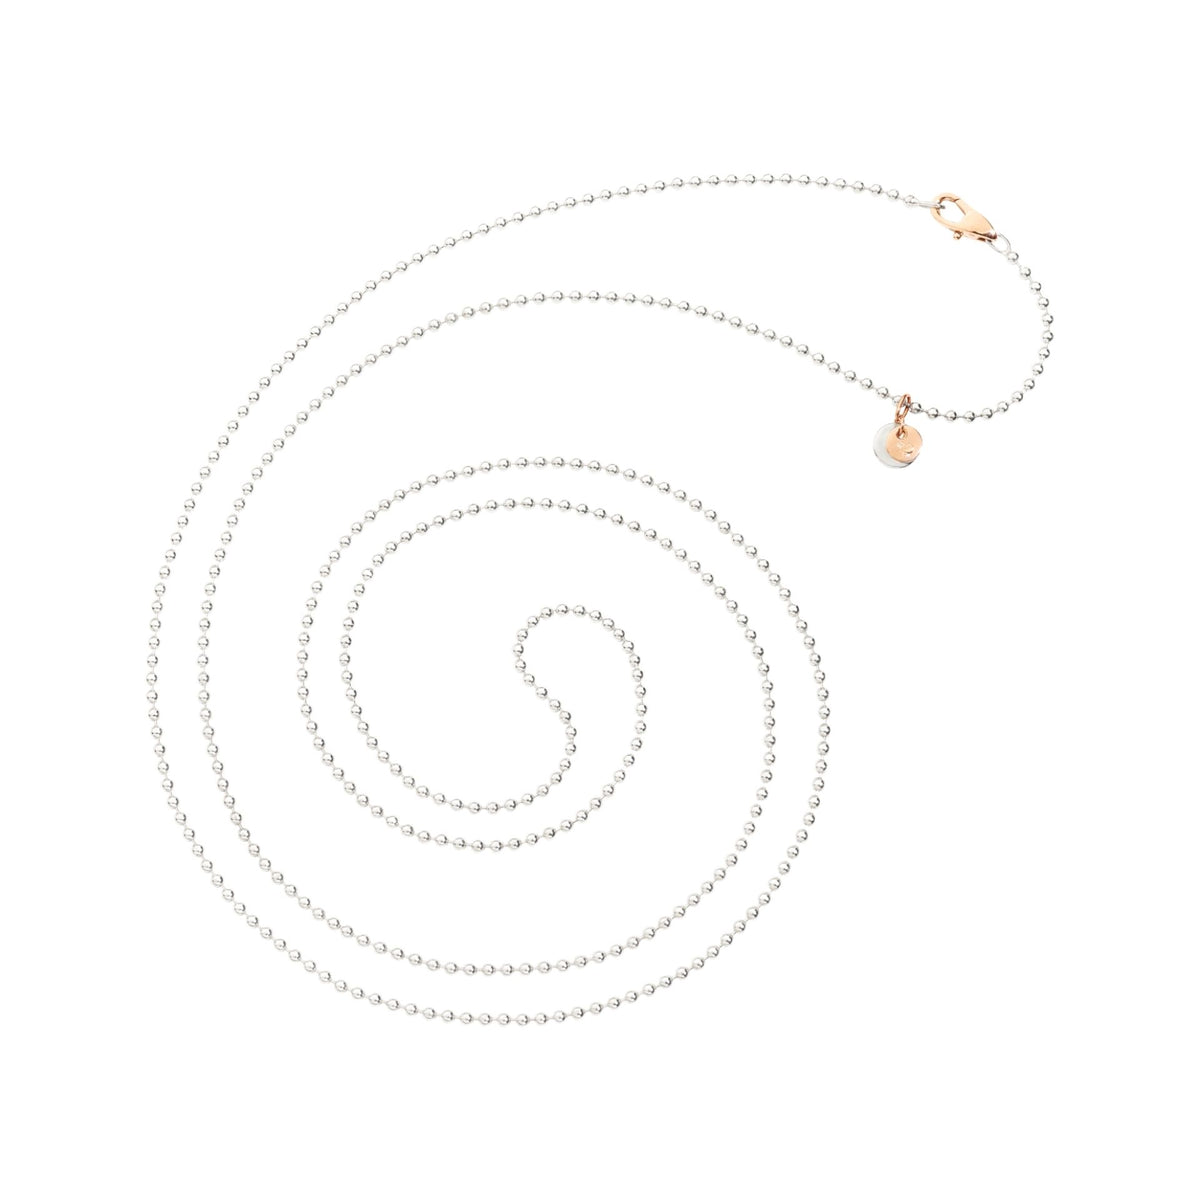 DoDo Bollicine Necklace in Silver with 9k Rose Gold Clasp - Orsini Jewellers NZ